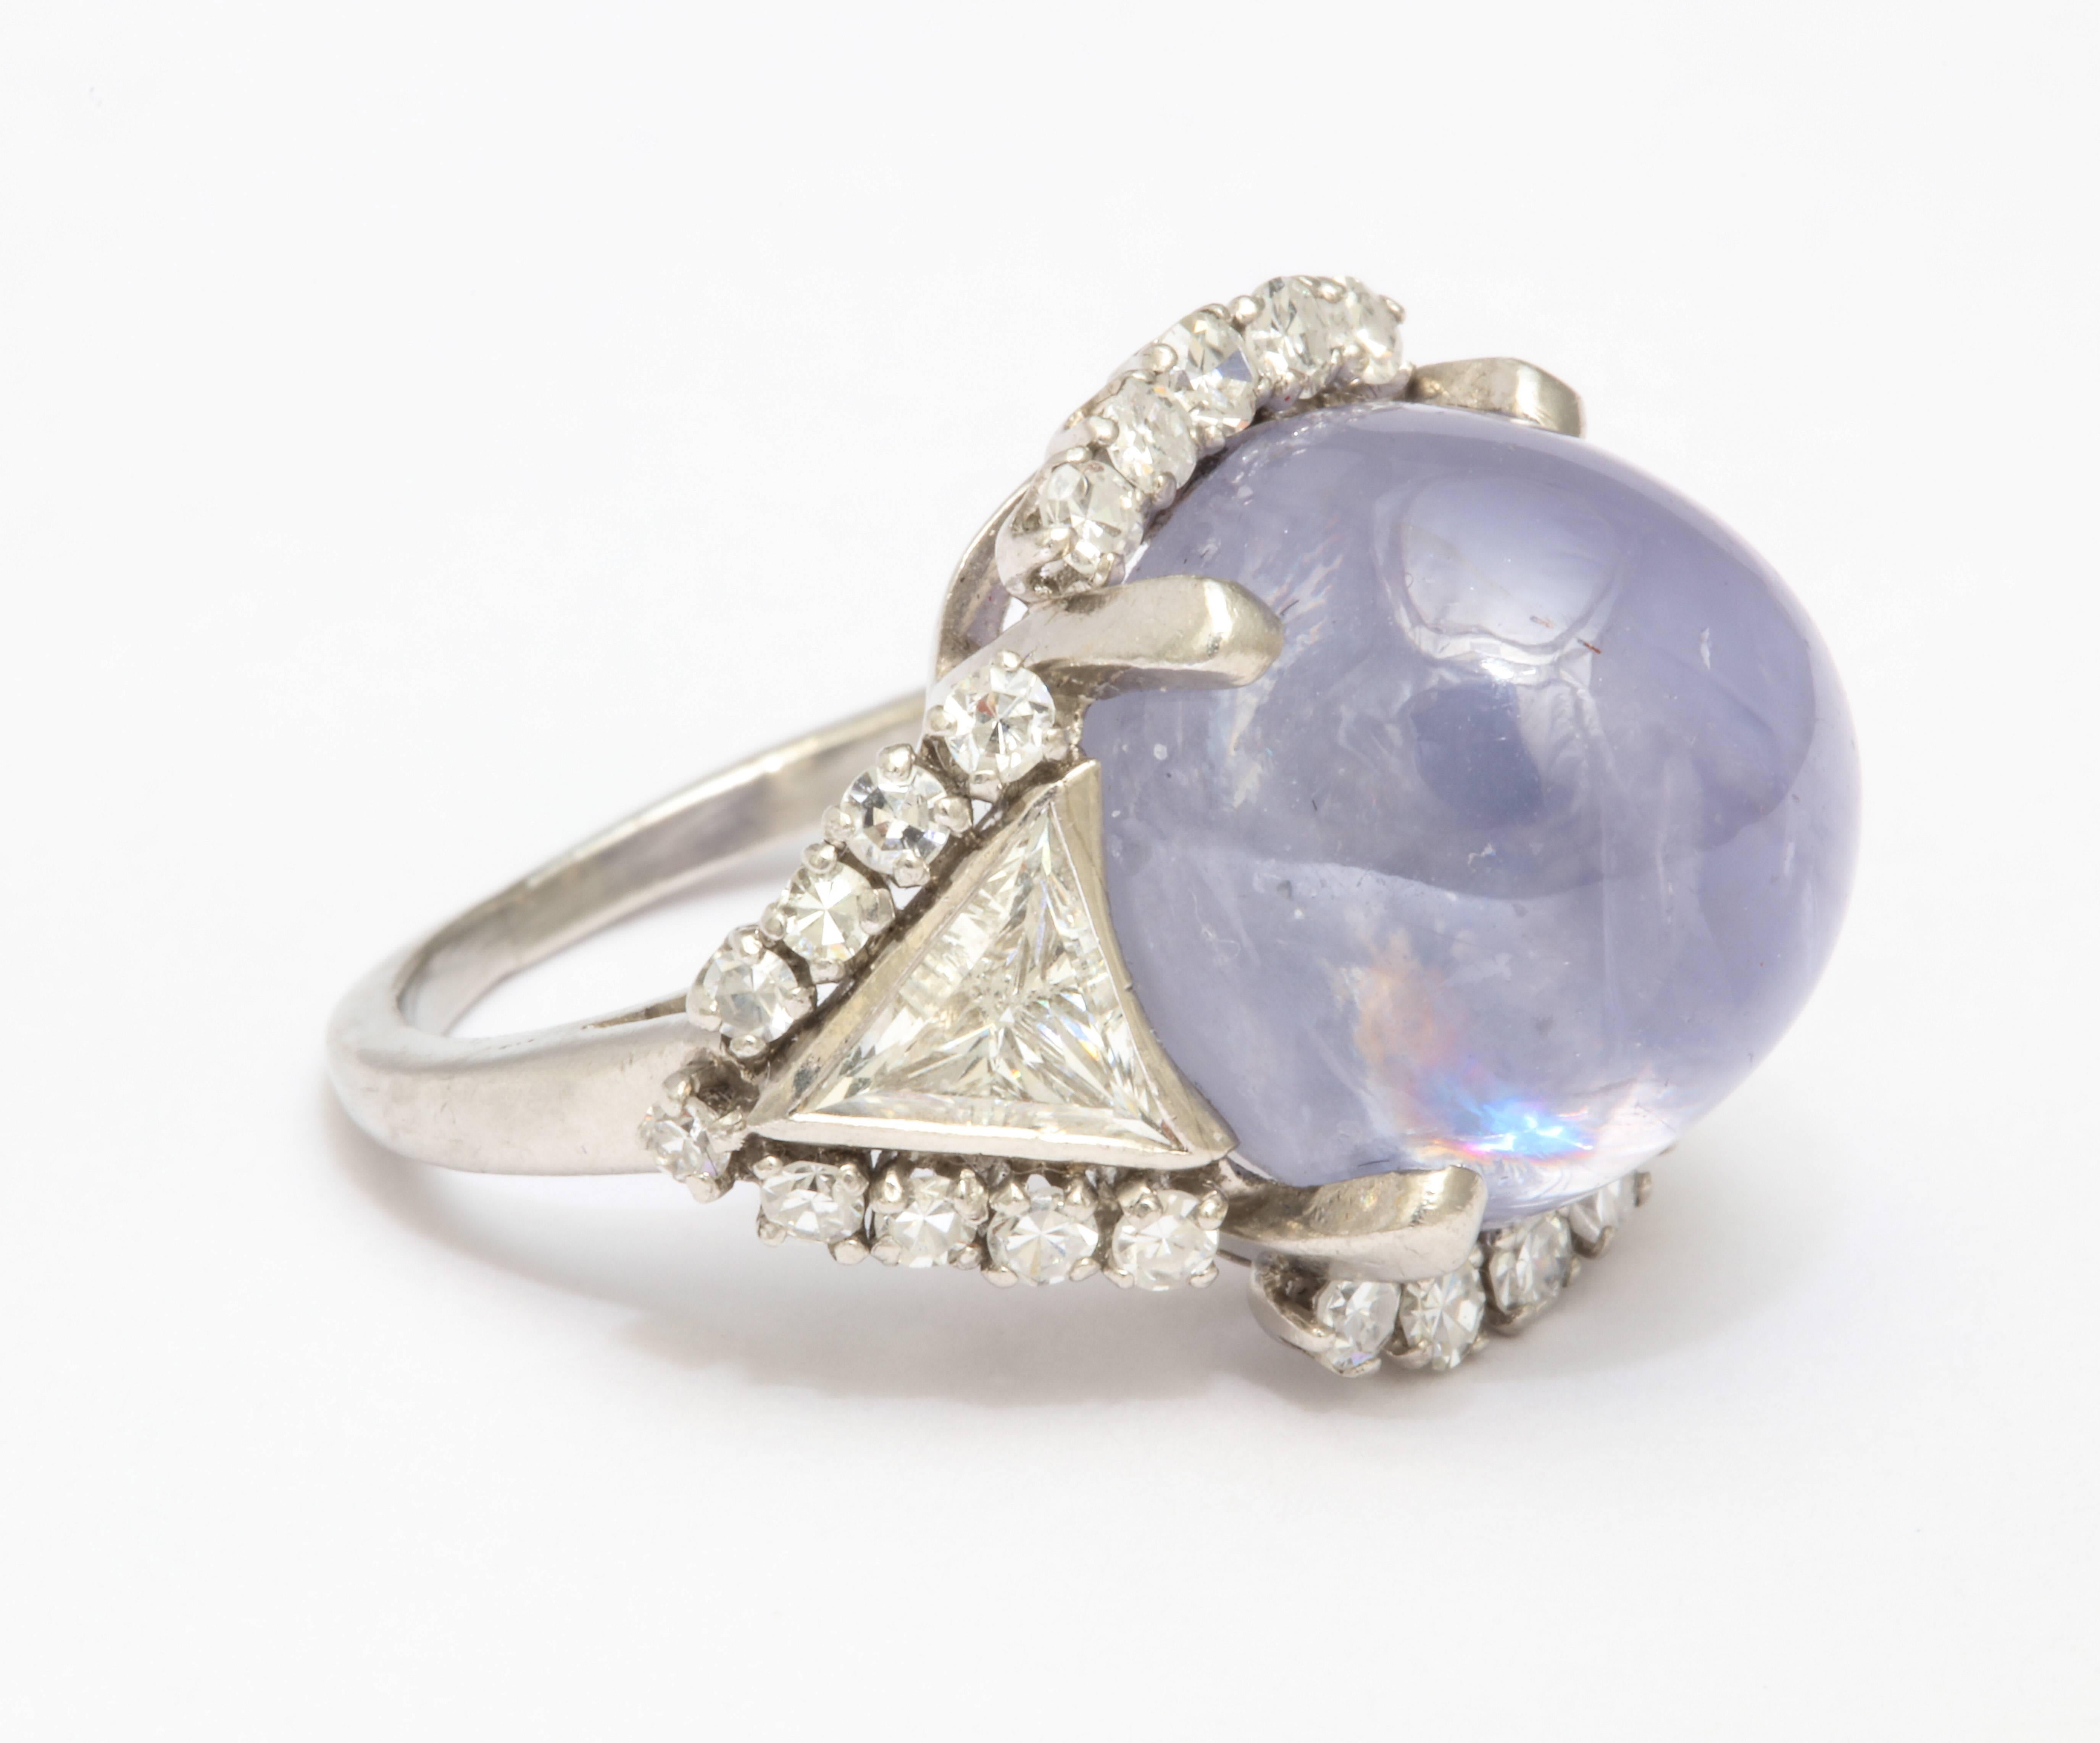  A stunning  lavendar Star Sapphire with with a triangular Diamond flanking each side as well as round diamonds encircling the star sapphire and triangle diamonds...beautiful mounting.  The ring is set in Platinum with AGI certificate 